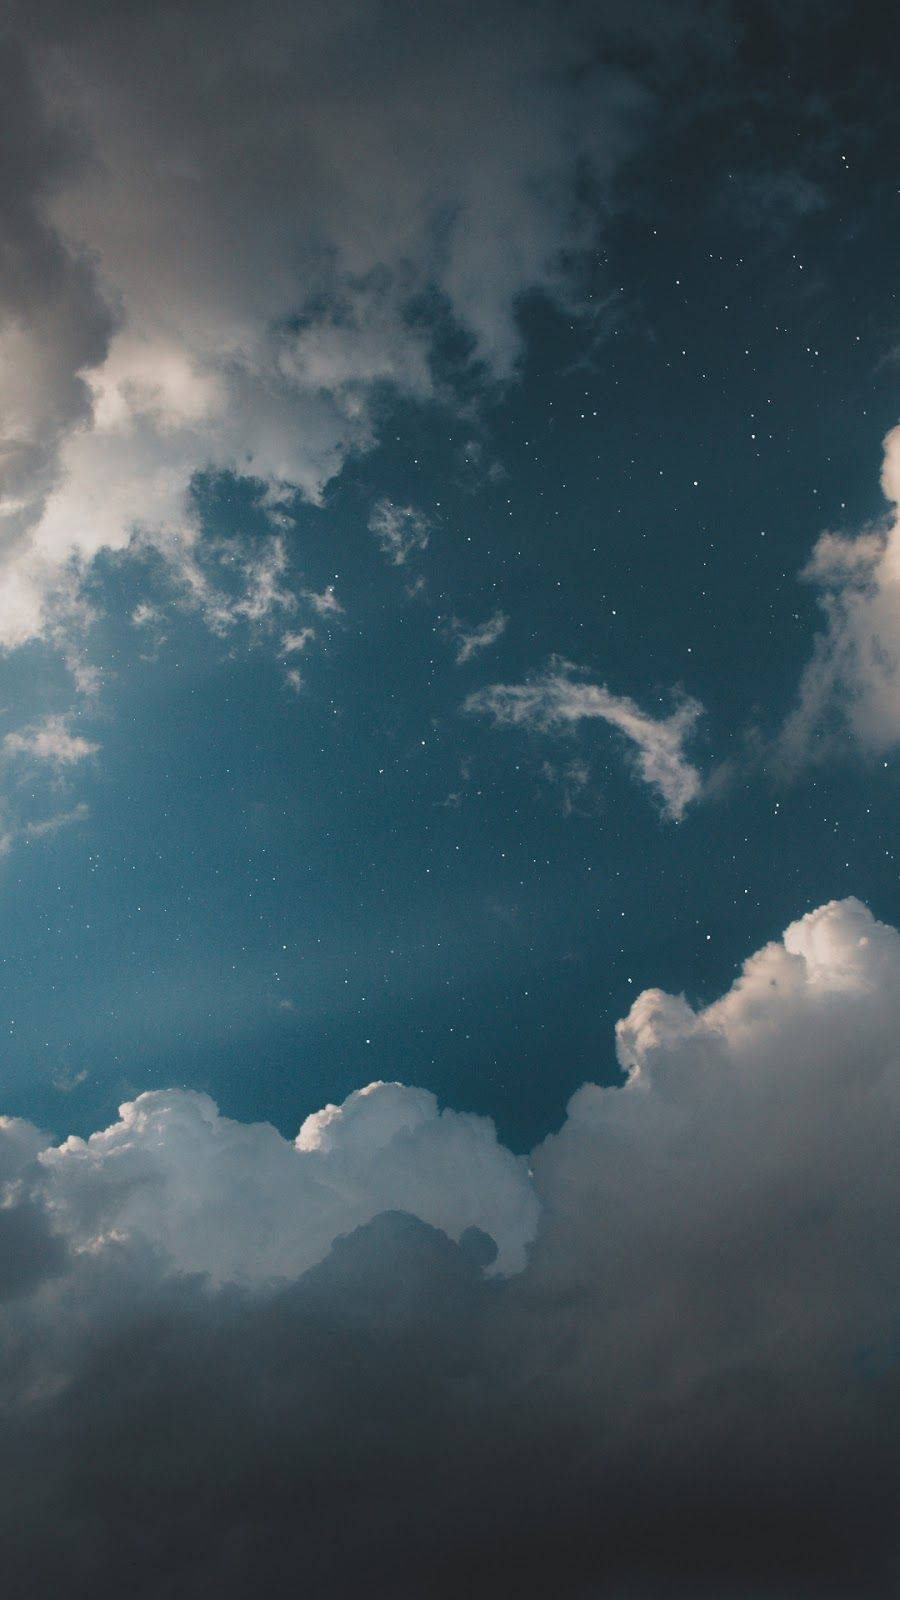 Whatsapp Chat Stars And Clouds Wallpaper